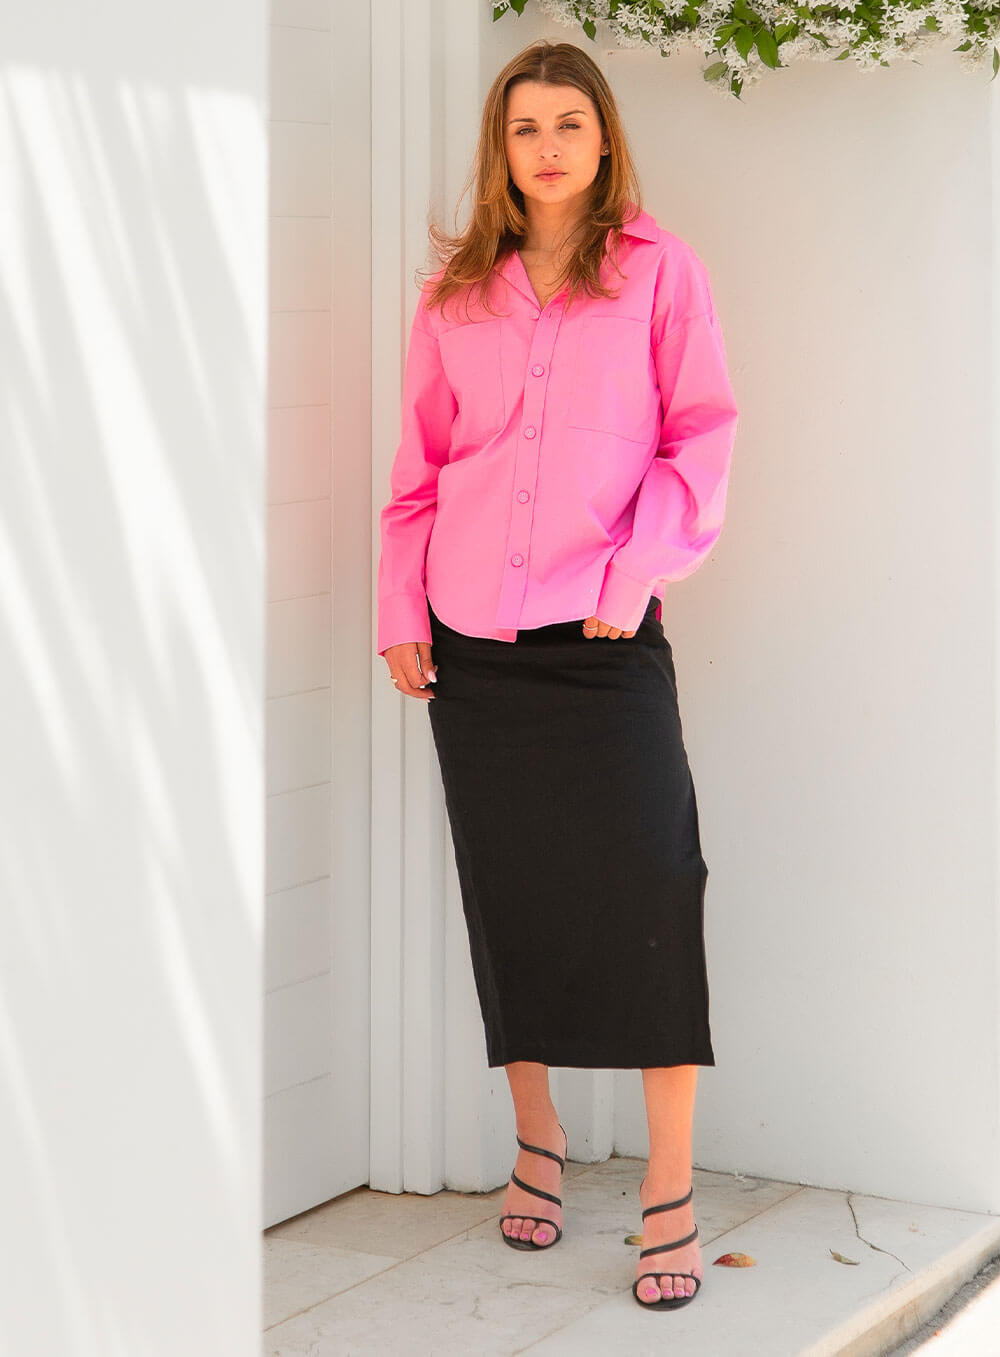 The Sienna Poplin Shirt in pink features button through front, scooped shirt hem style, self fabric covered buttons, luxe soft and breathable cotton poplin base